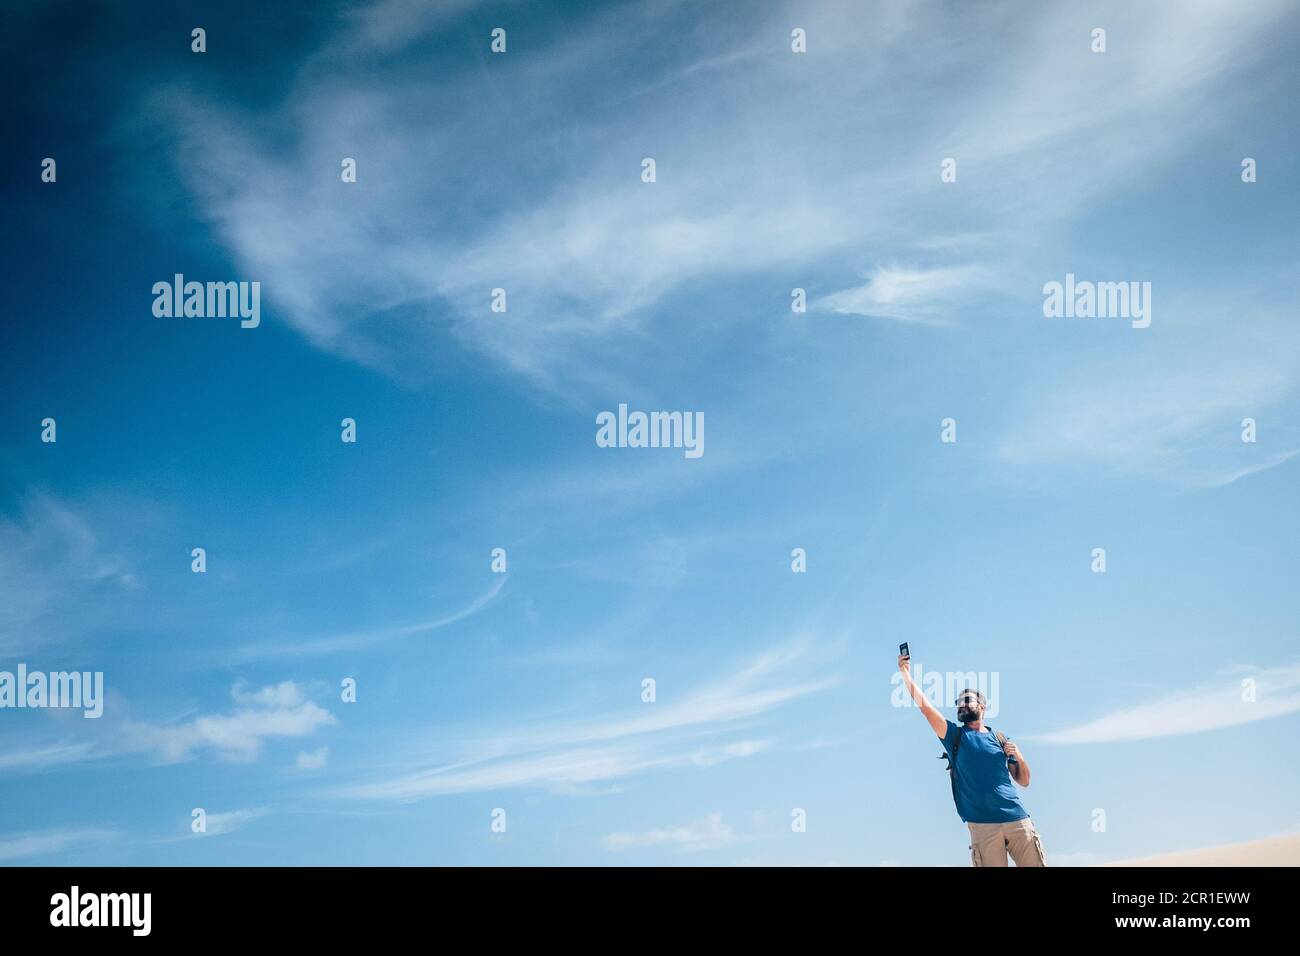 Standing man in outdoor leisure activity check phone internet signal to communicate - concept of internet phone device and communication time in the Stock Photo